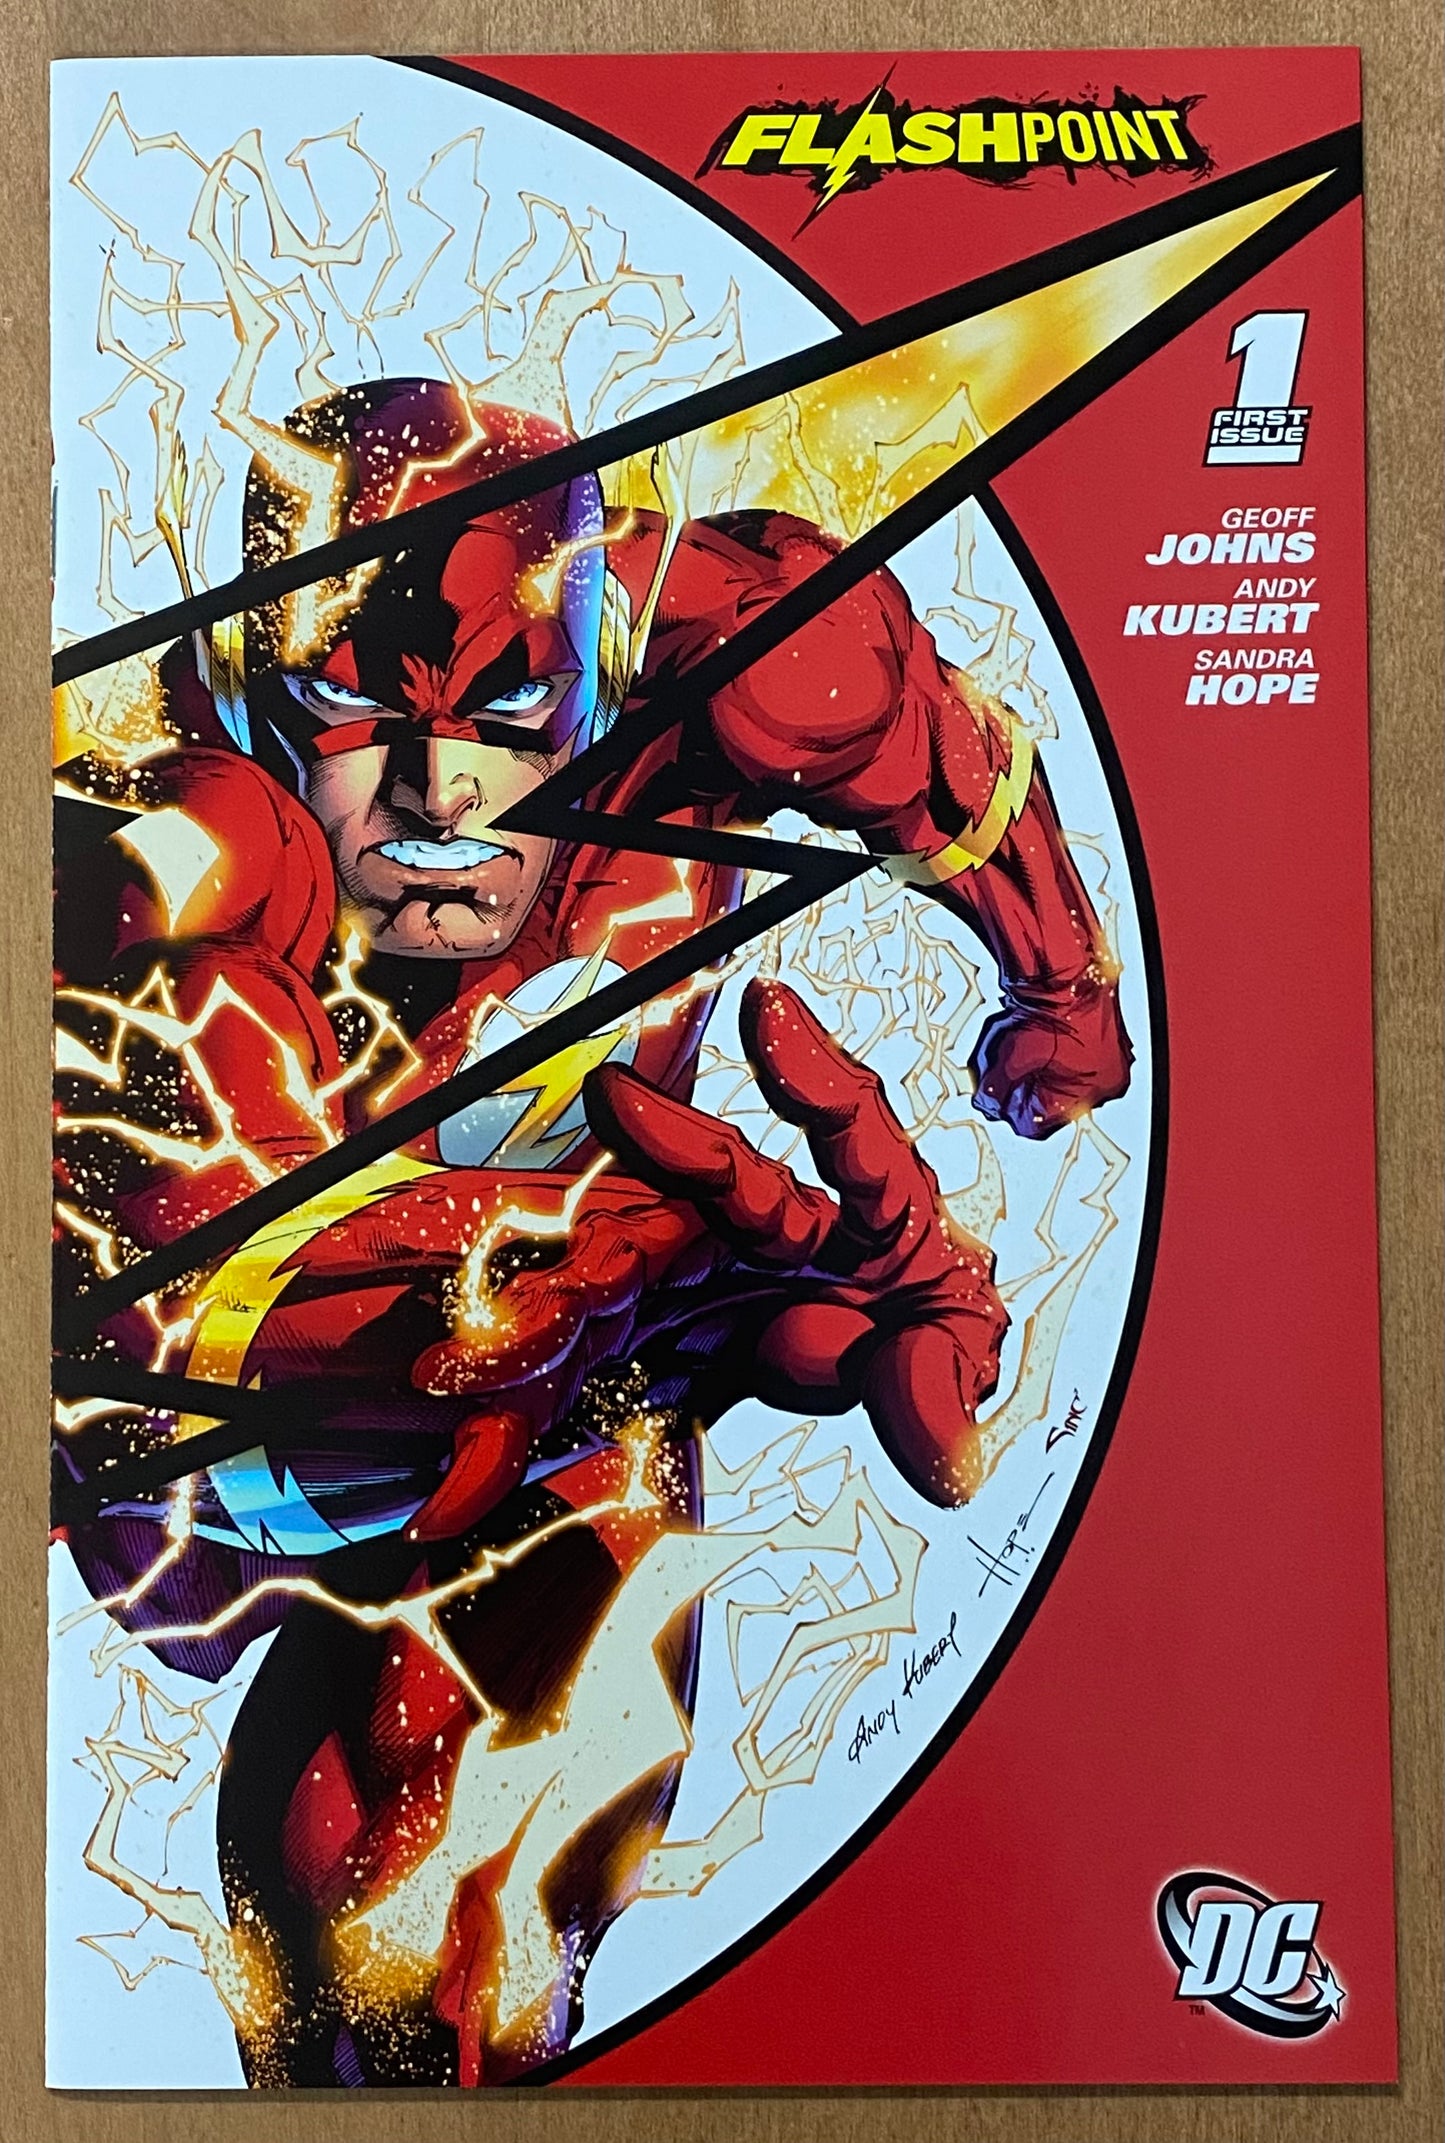 Flashpoint #1   SCDD Exclusive